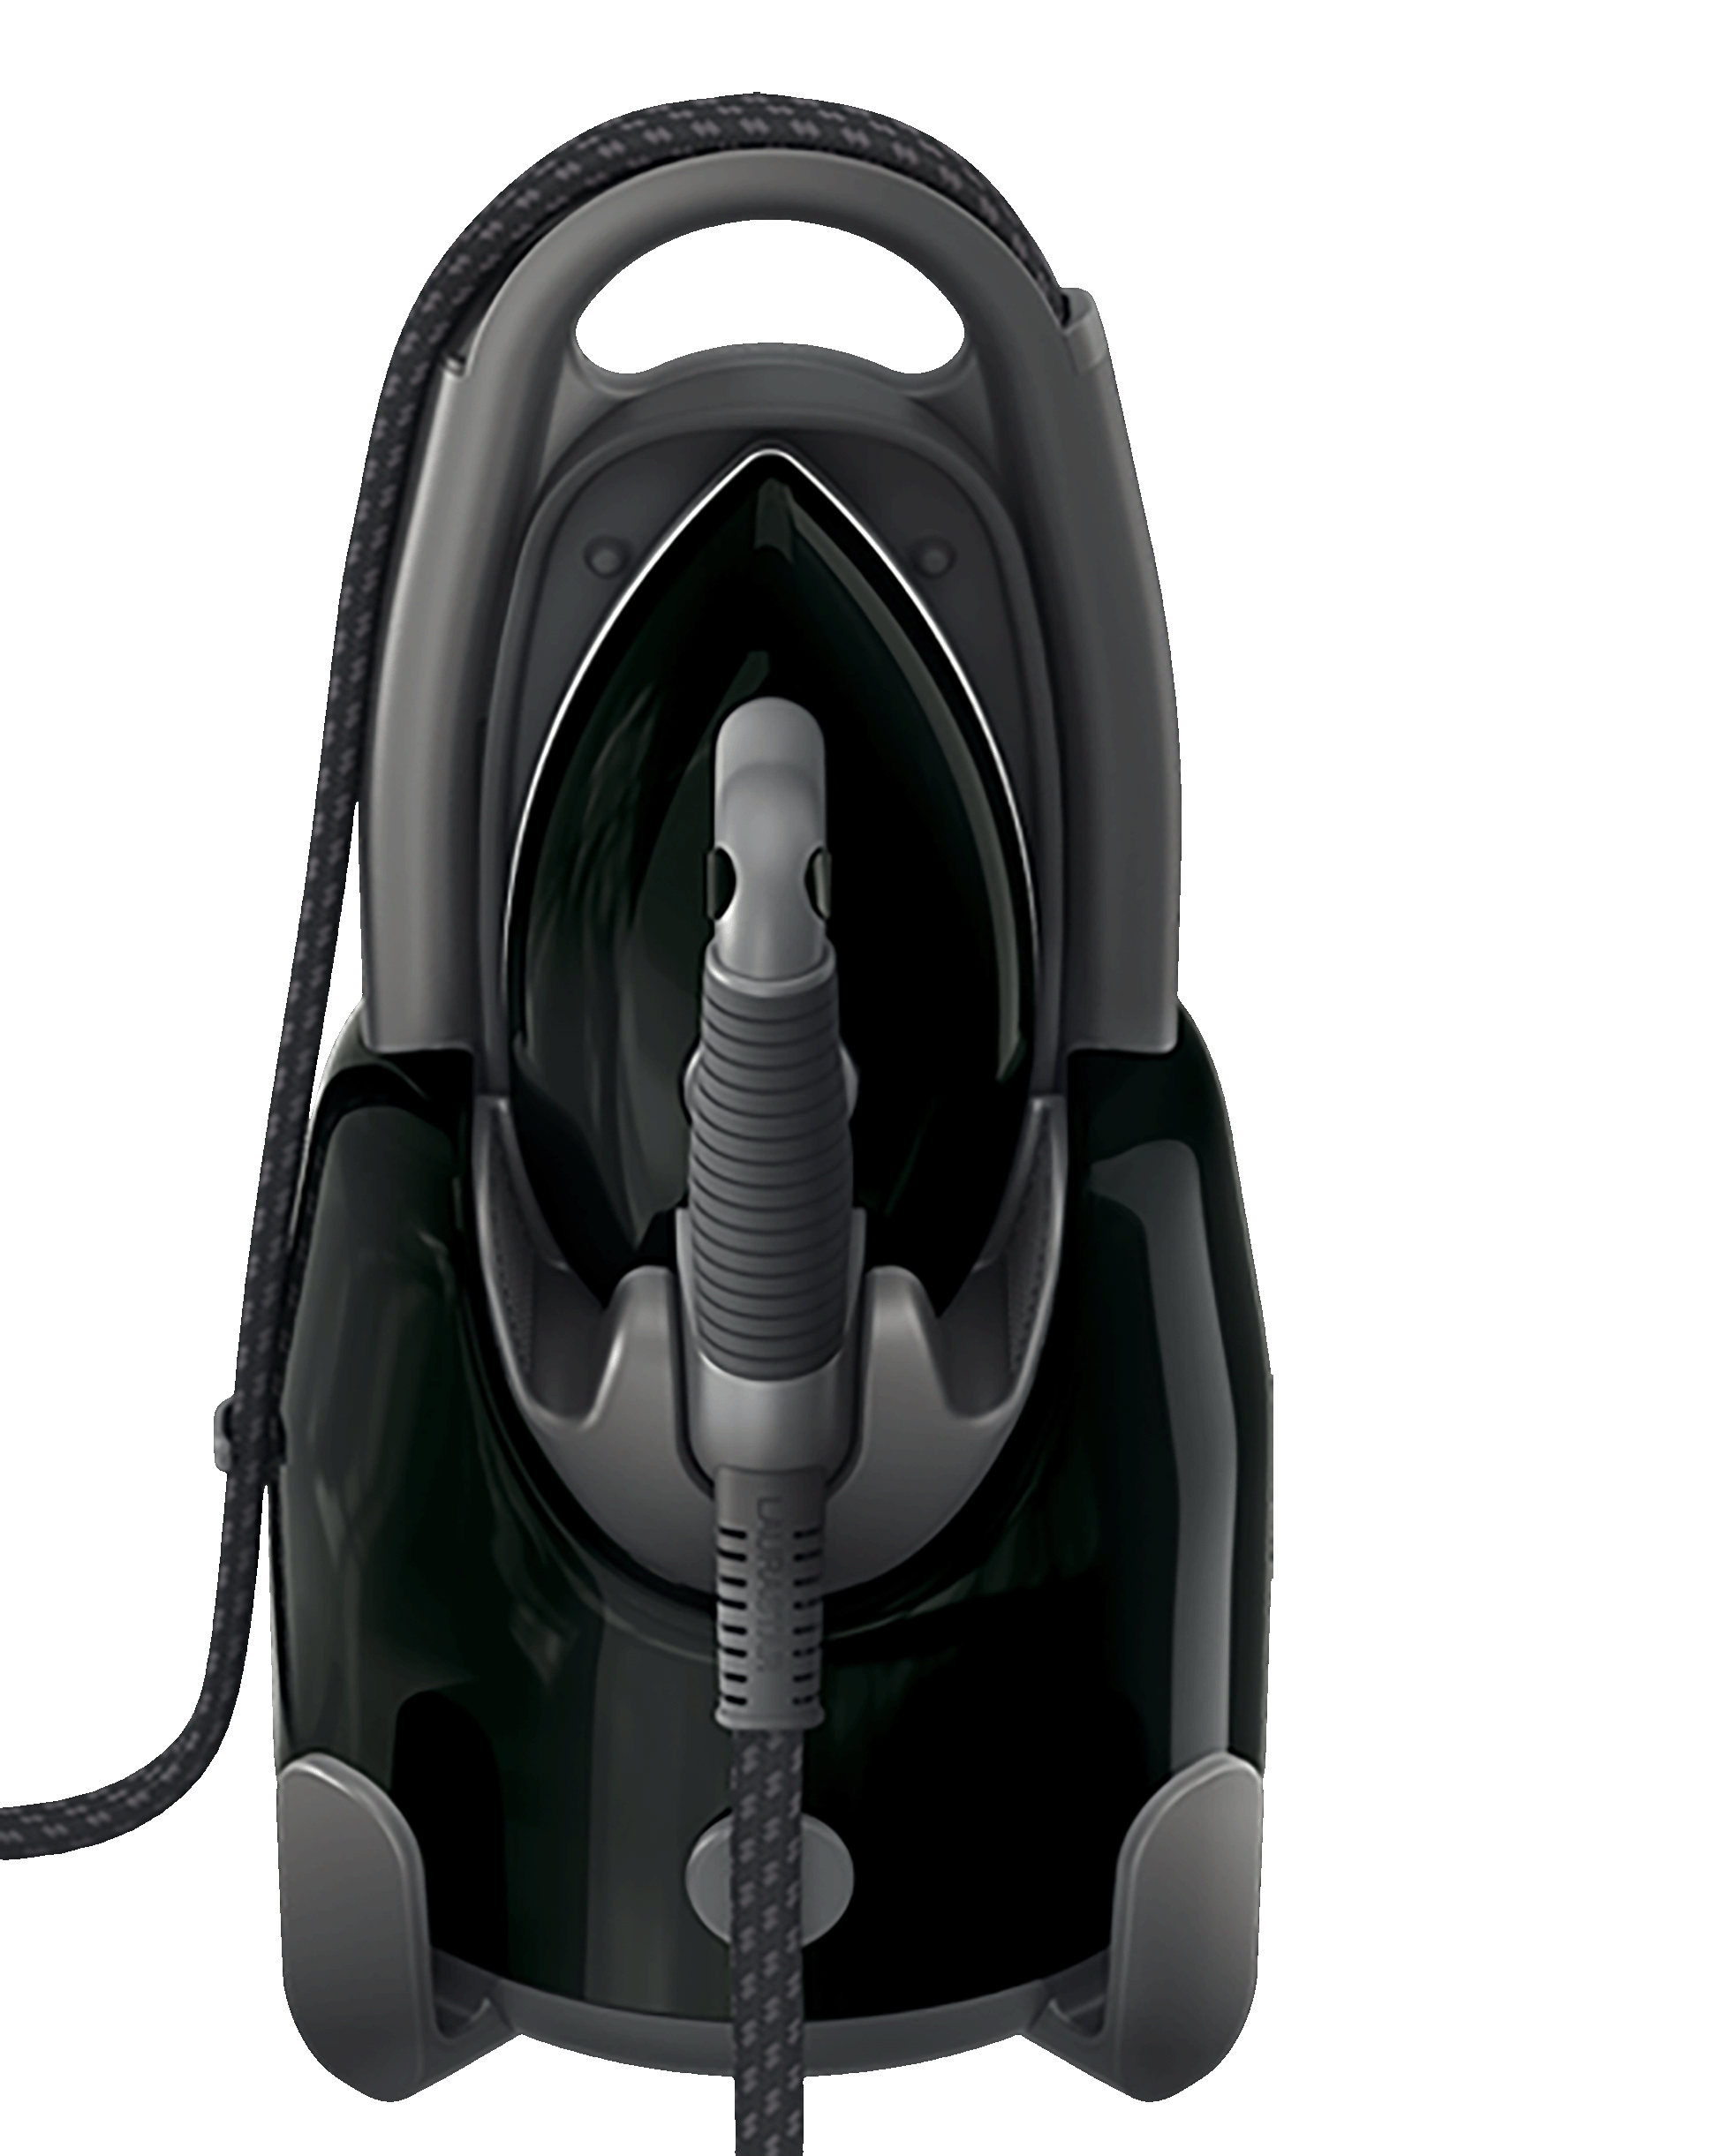 Ultimate LAURASTAR Plus Shut-off Automatic department in Black Irons at Iron the The (1450-Watt) Lift